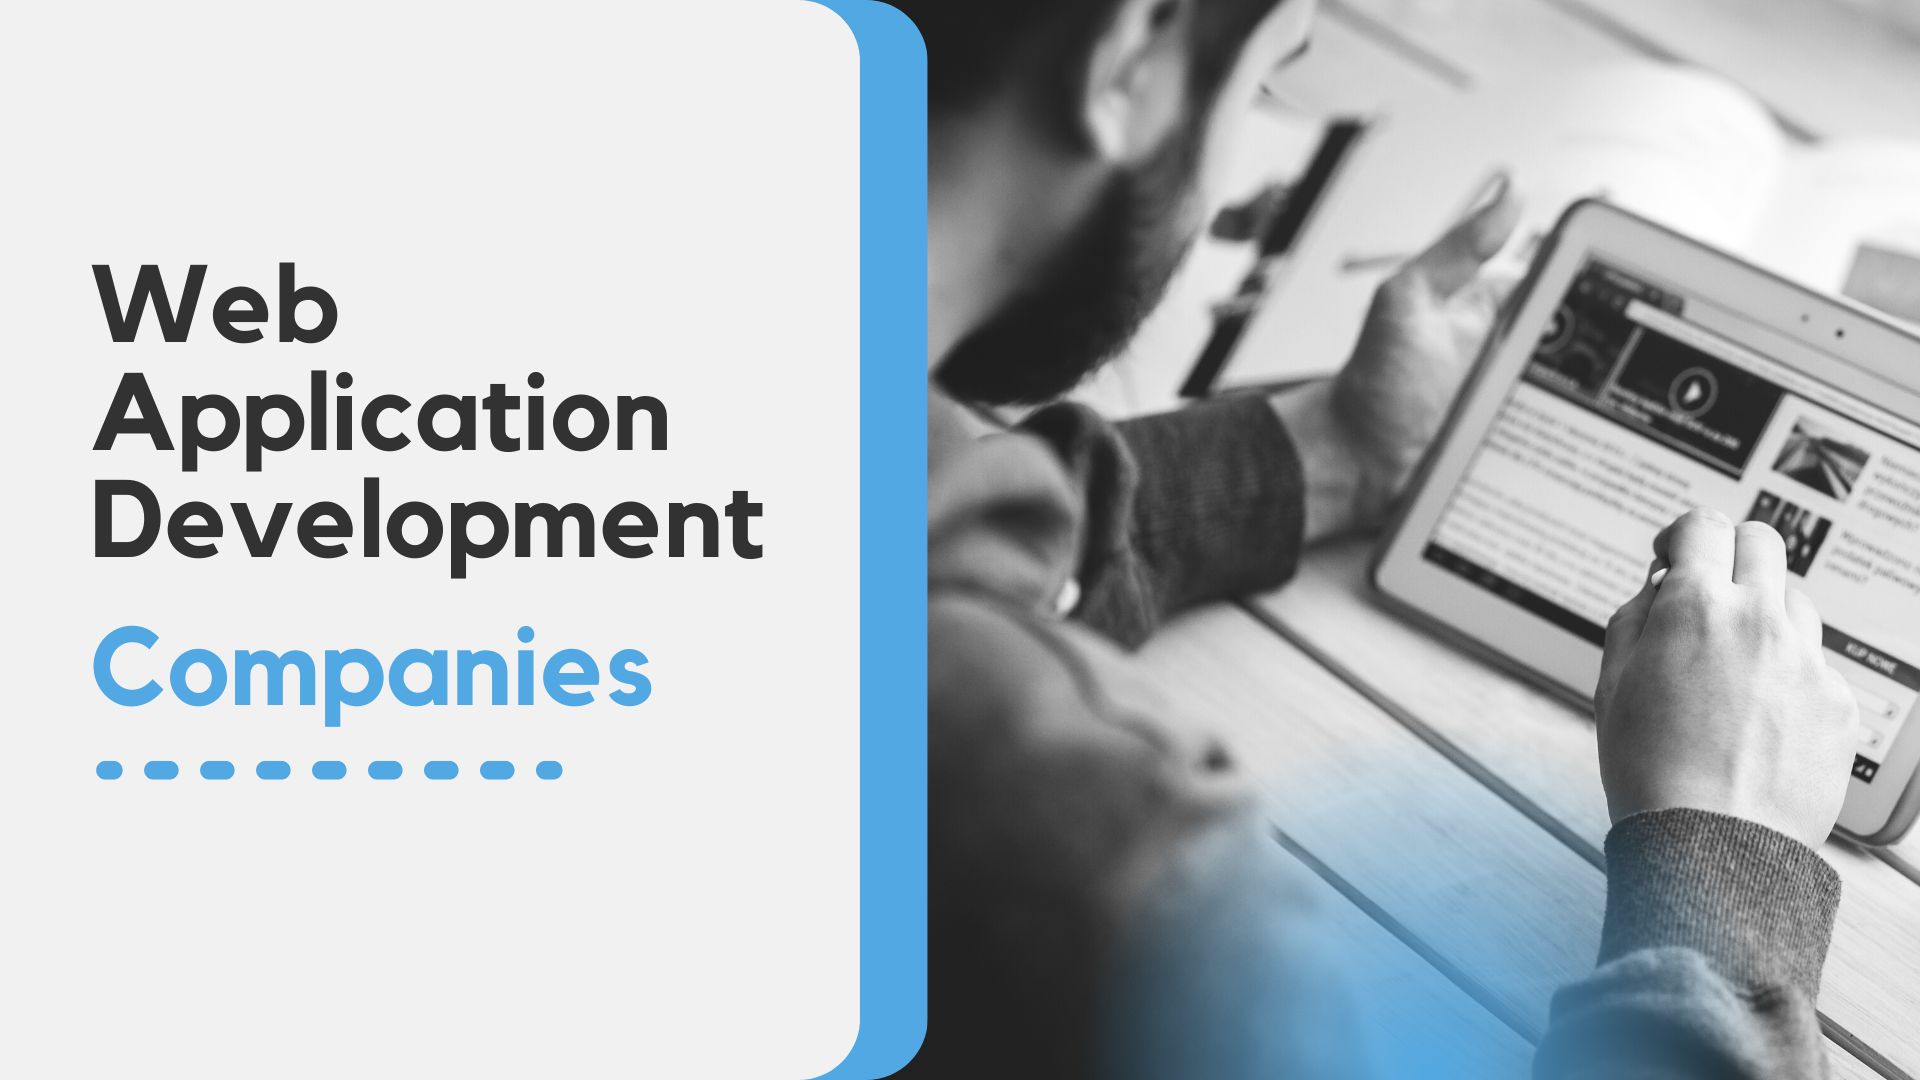 Top Web Application Development Companies That Put User Experience First - Mobile and Gadgets